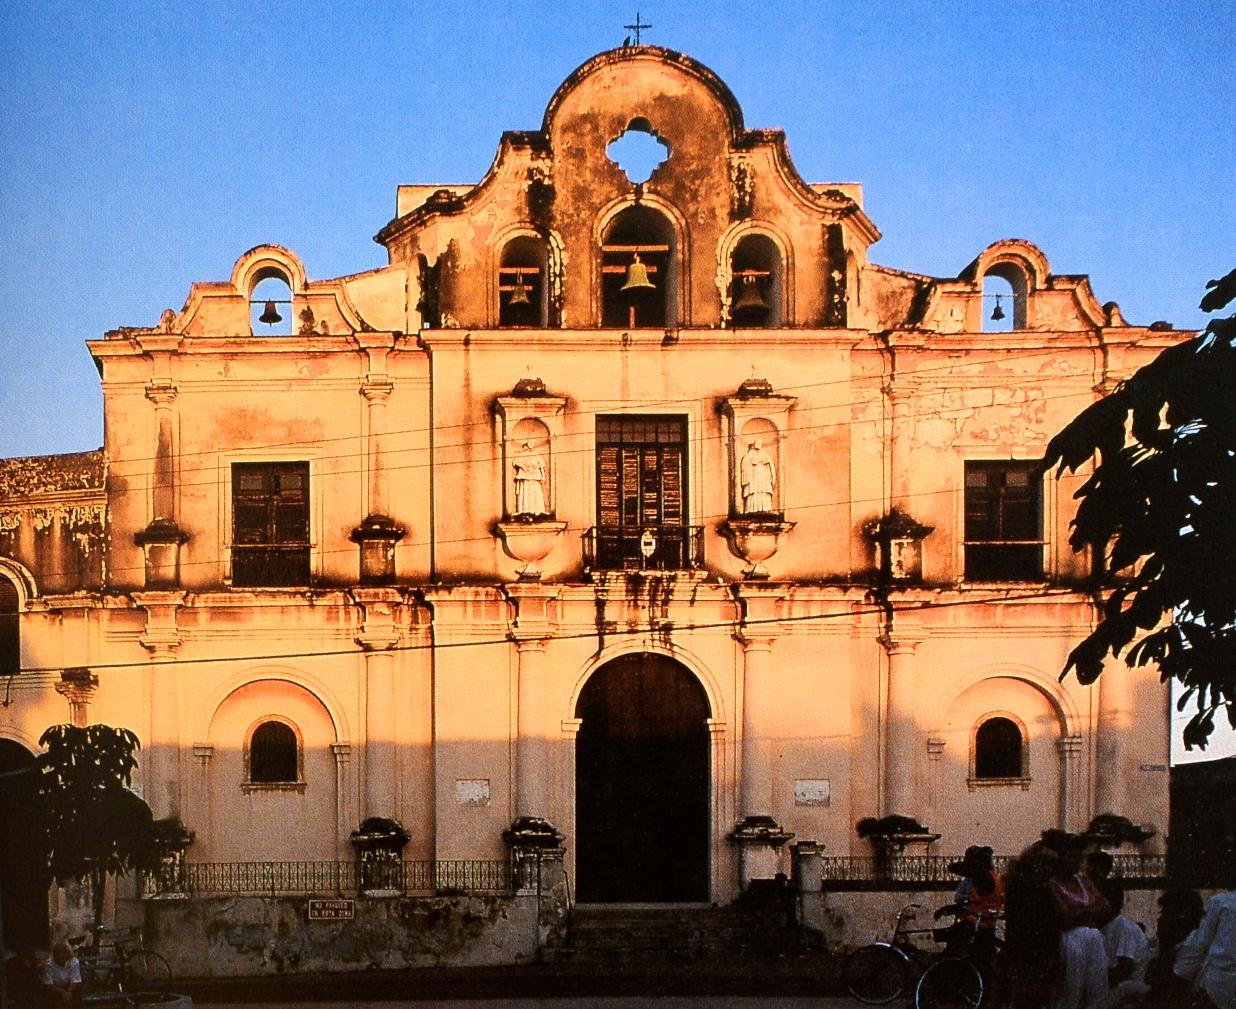 Cuba: 400 Years of Architectural Heritage by Rachel Carley, Stated 1st Printing 13